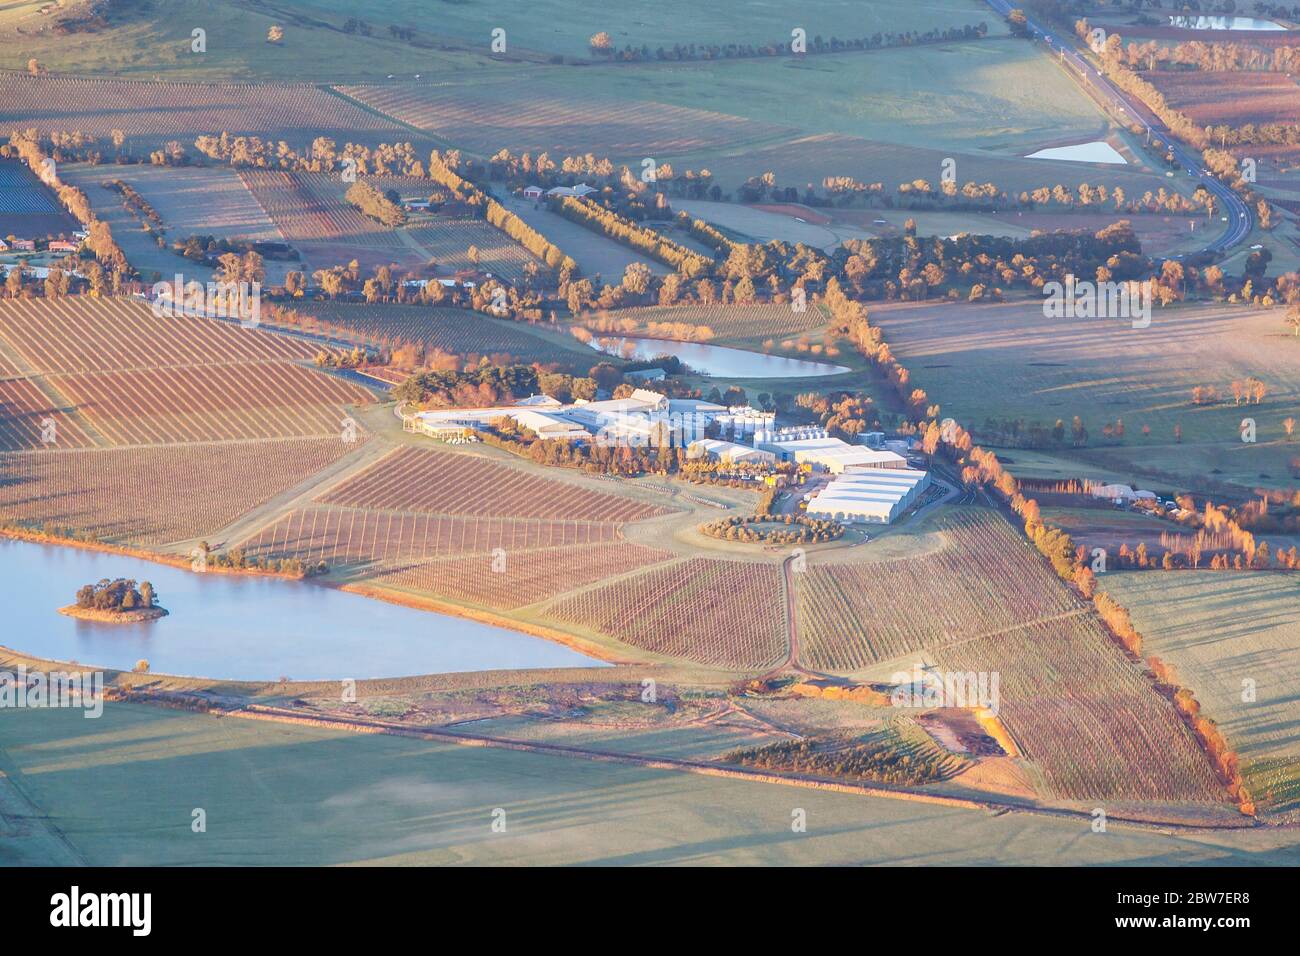 Aerial View of a Vineyard in Australia Stock Photo